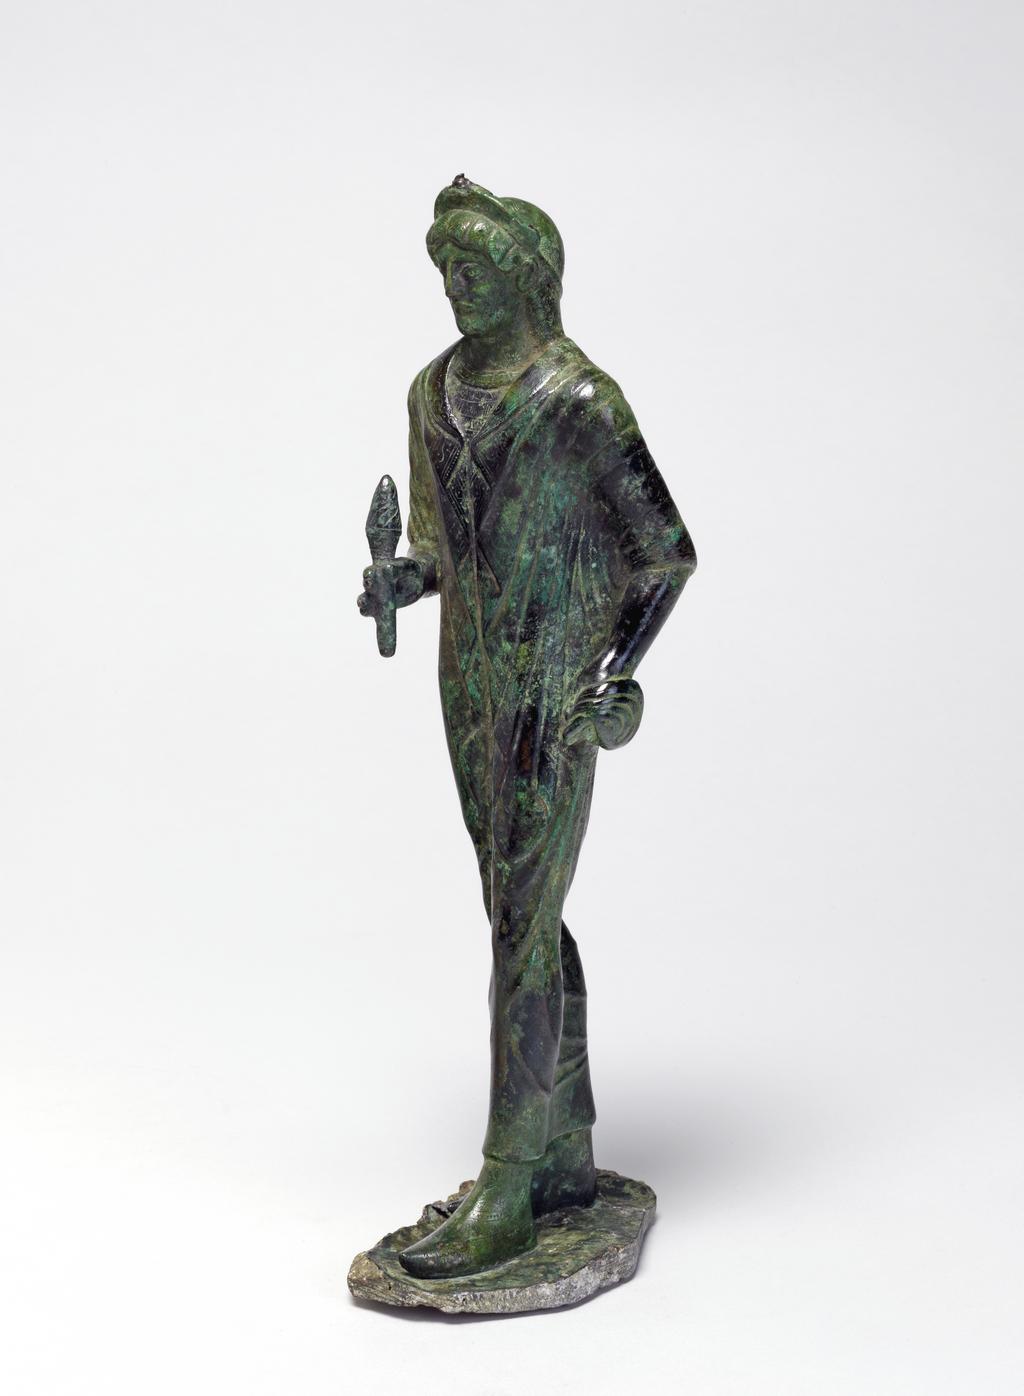 An image of GR.2.1946: Figure. Statuette, female. Bronze, height 0.26 m, circa 1801-1900. Dating not confident.